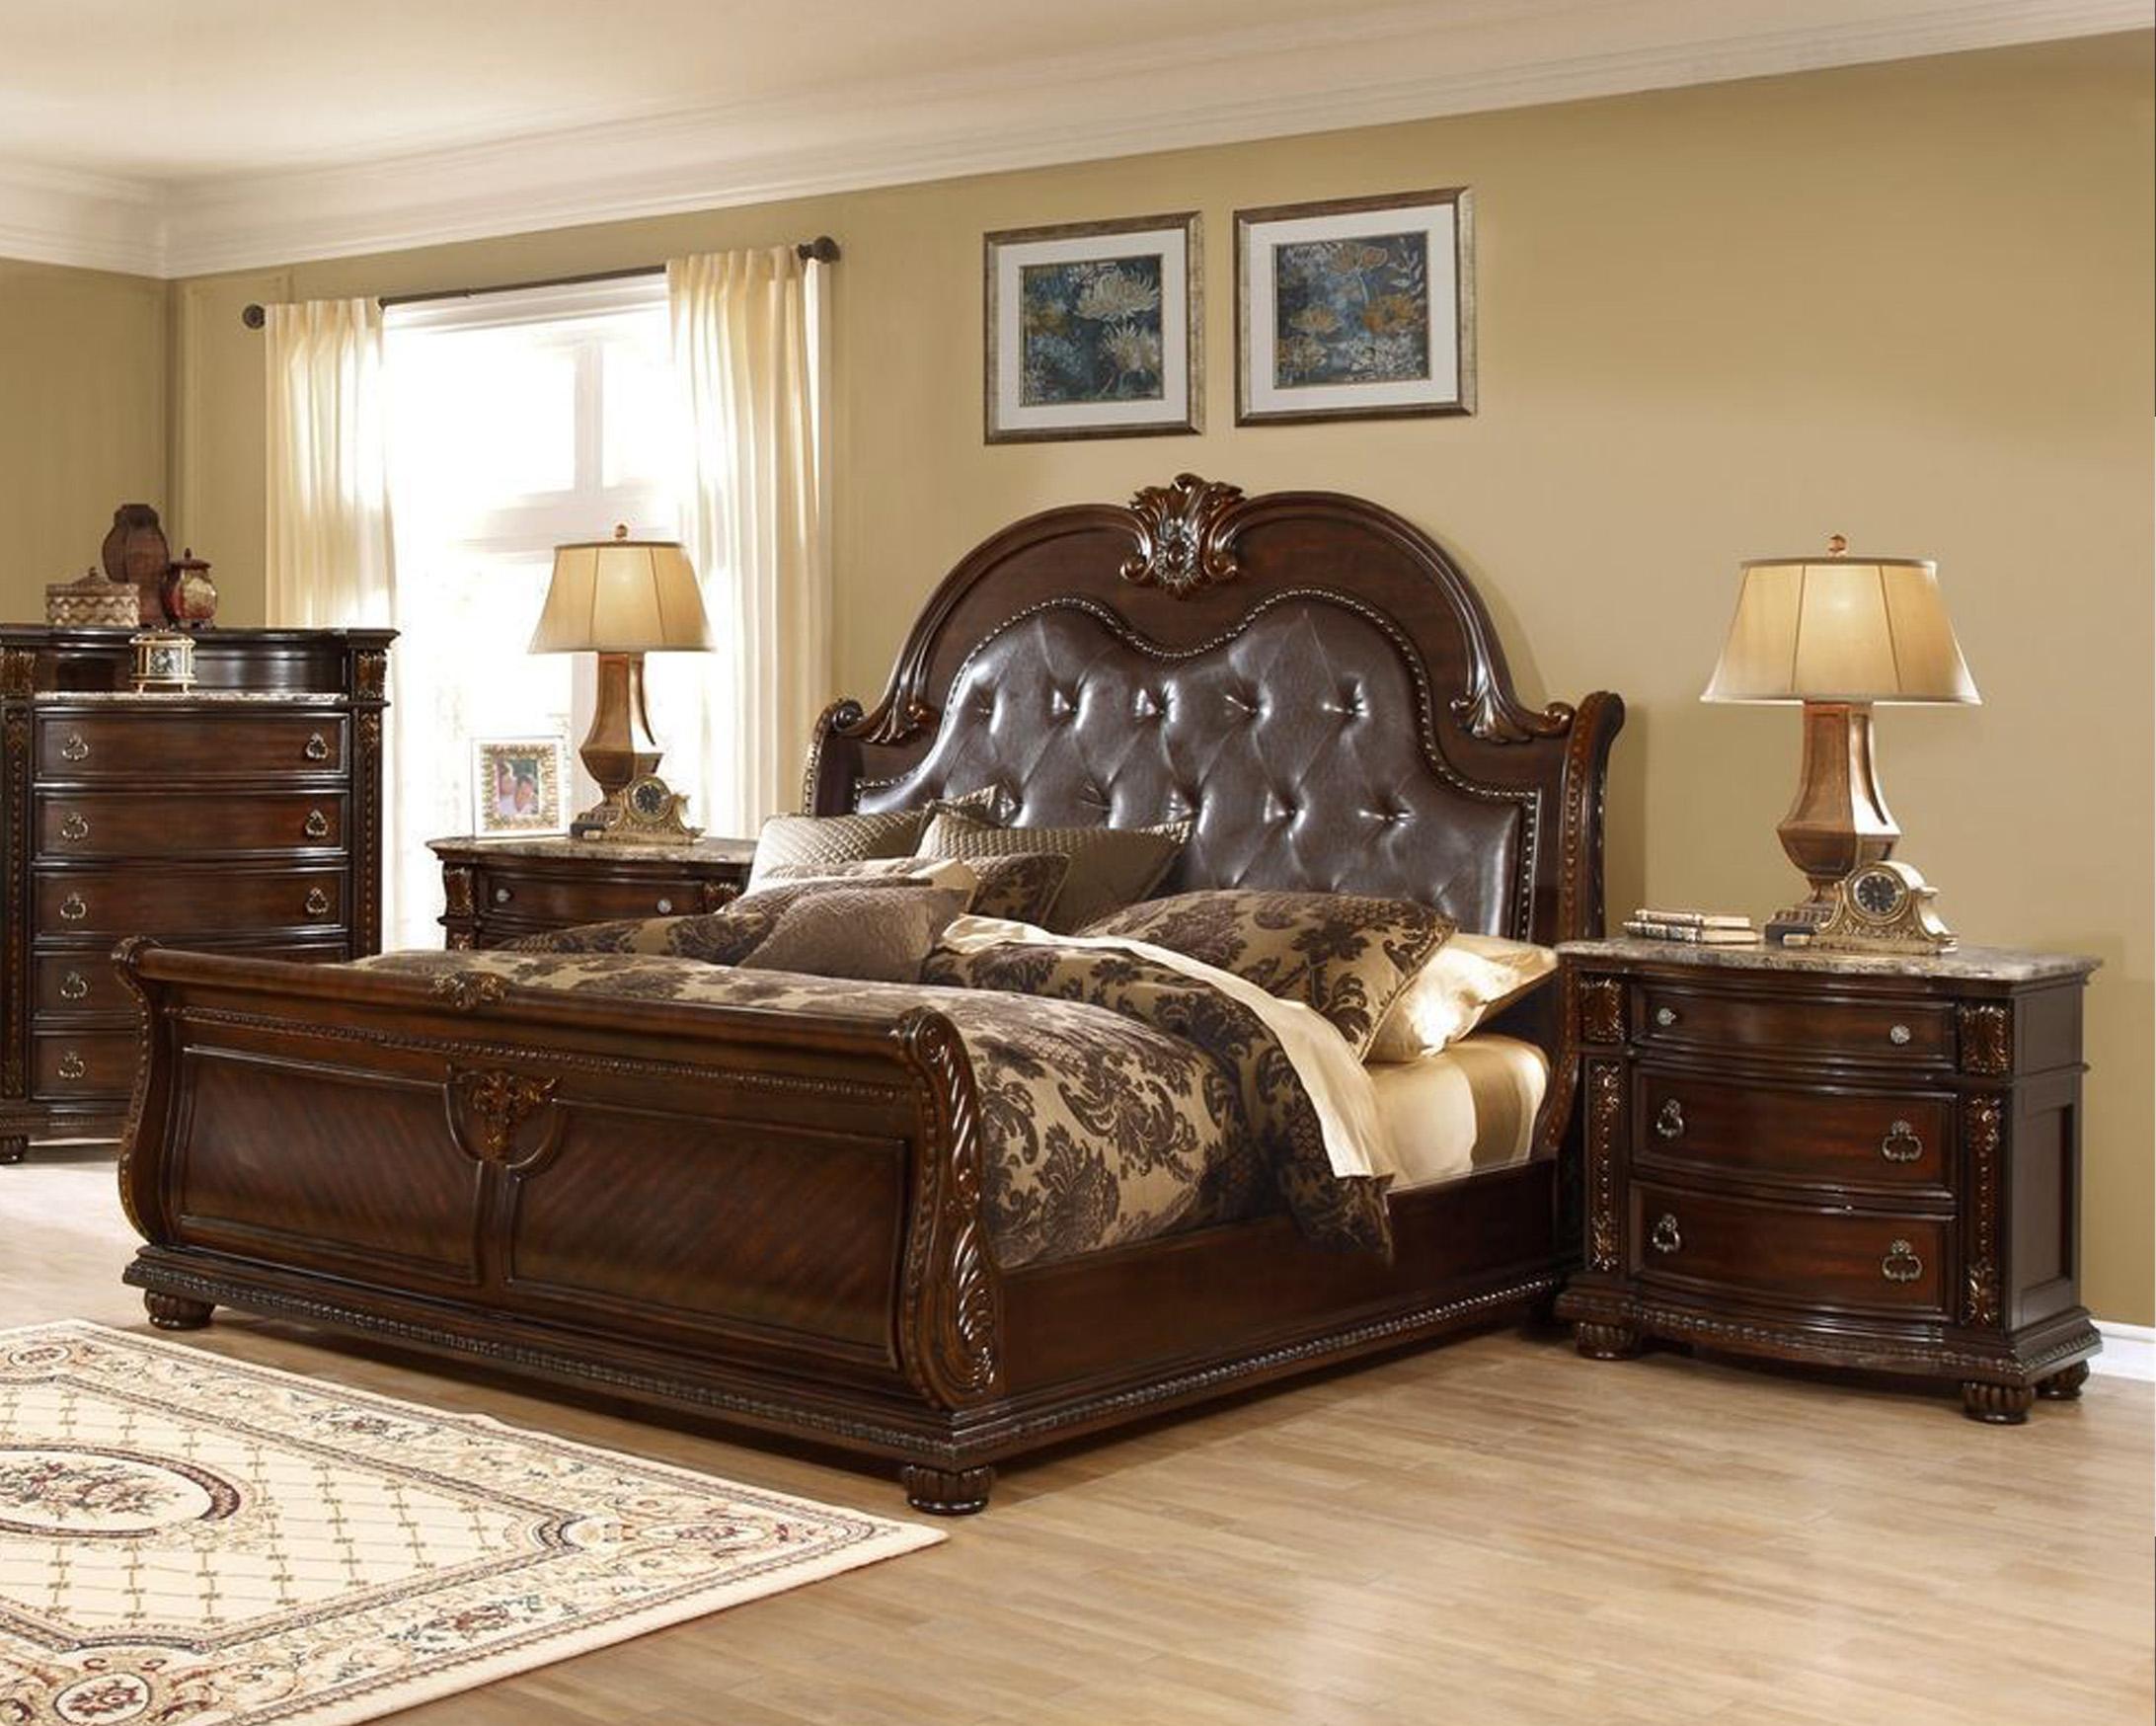 Classic, Traditional Sleigh Bedroom Set B9505 B9505-CK-N-2PC in Dark Cherry Bonded Leather